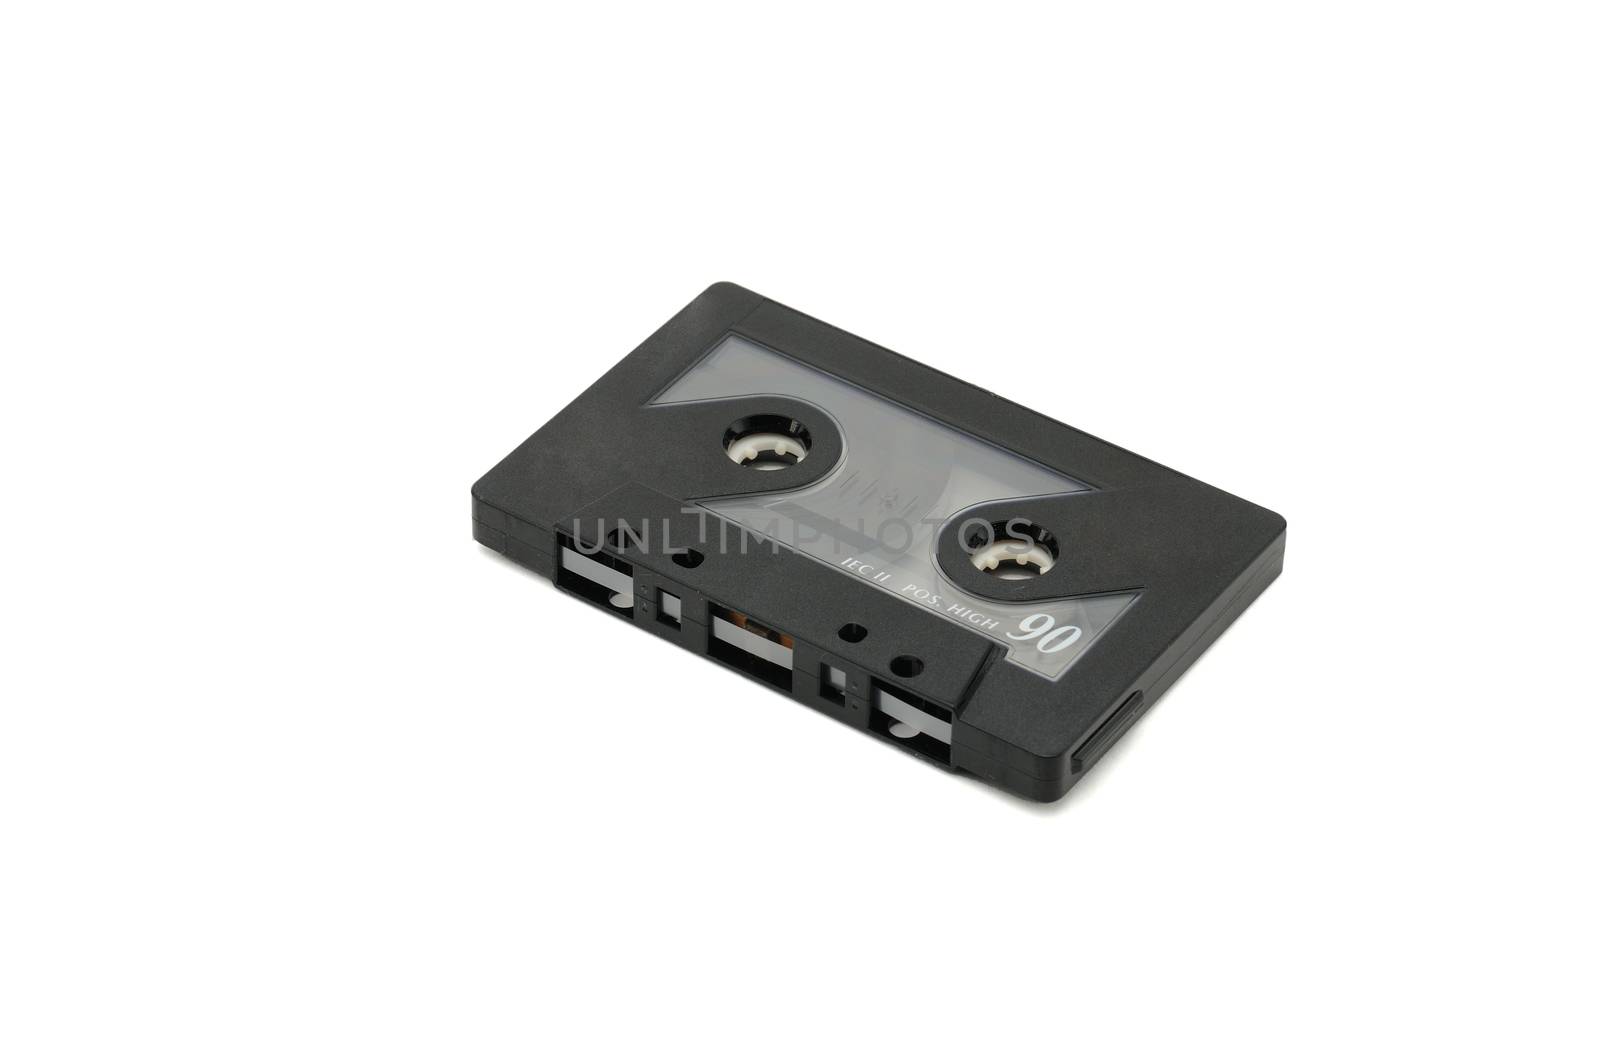 Audio cassette to record sound 70s 90s years by moviephoto